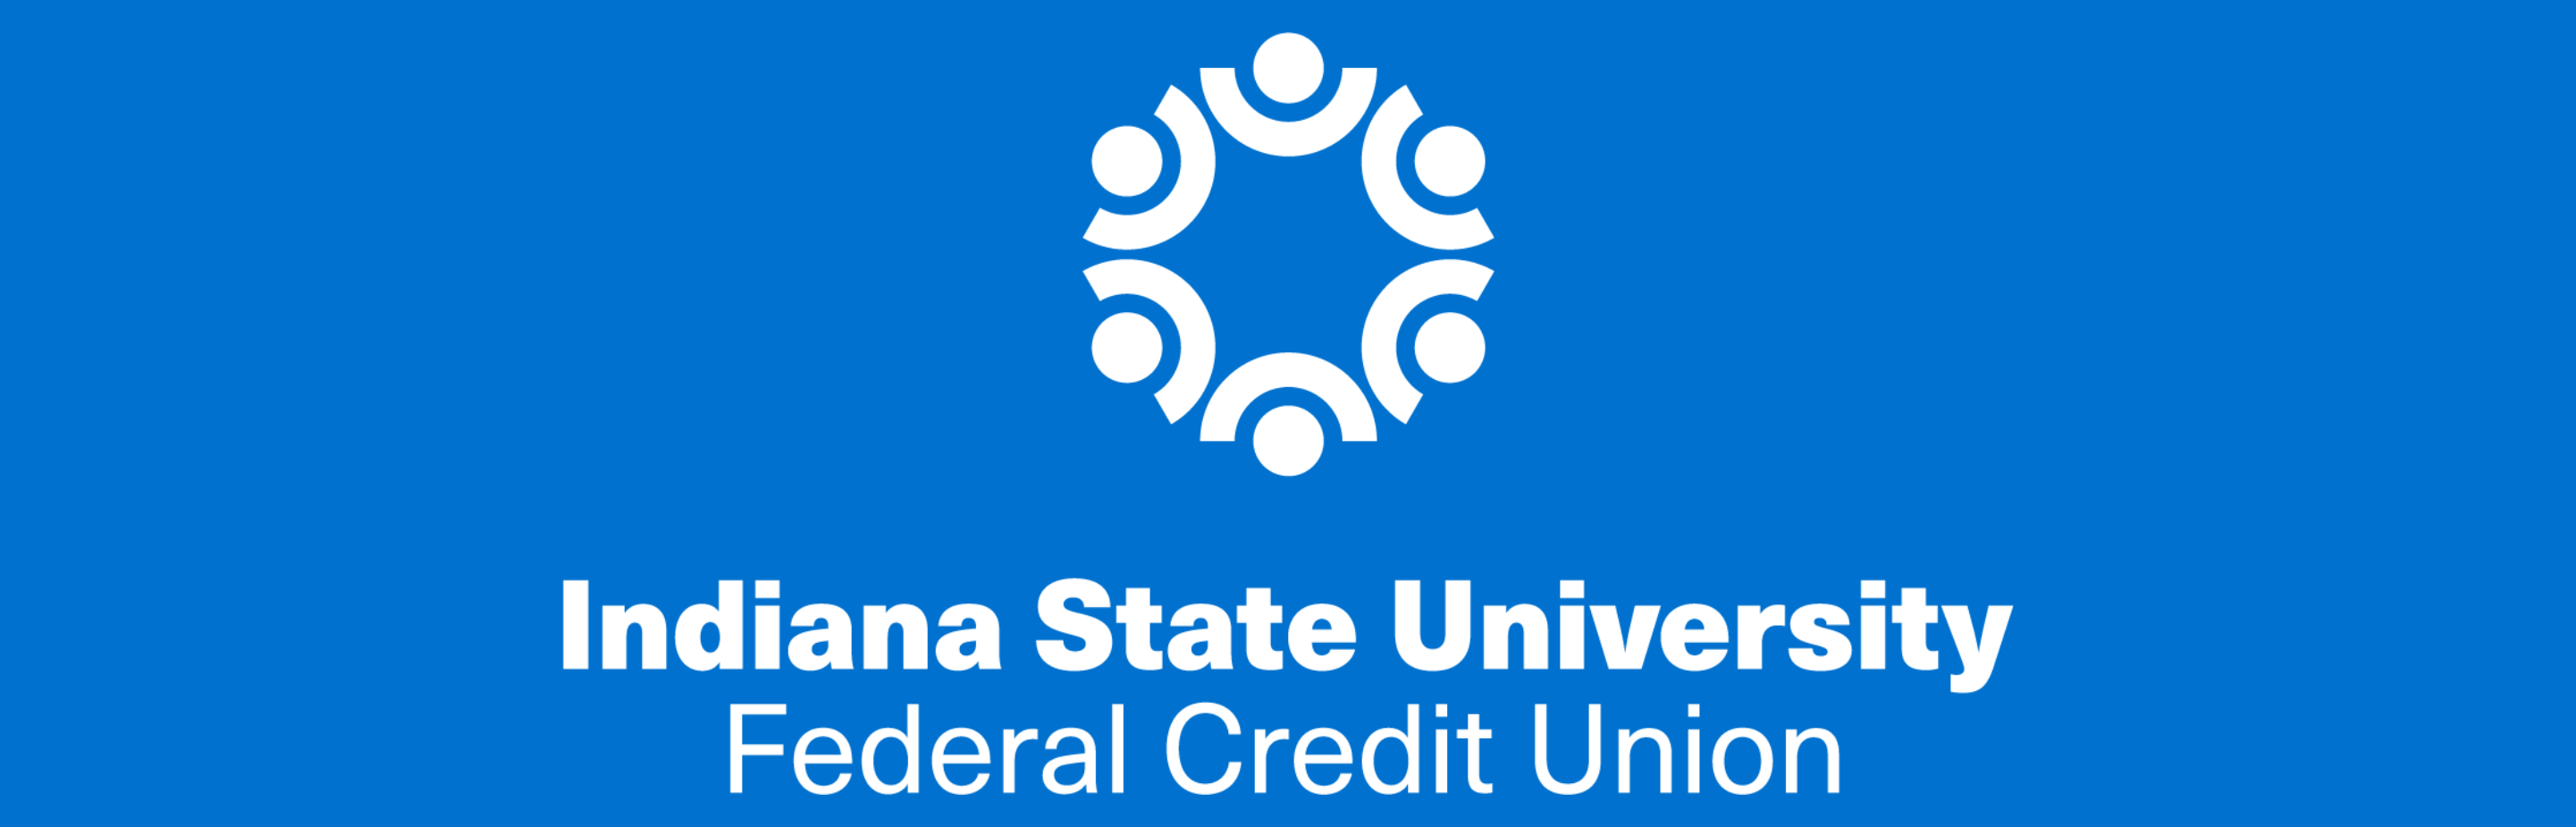 Indiana State University Federal Credit Union